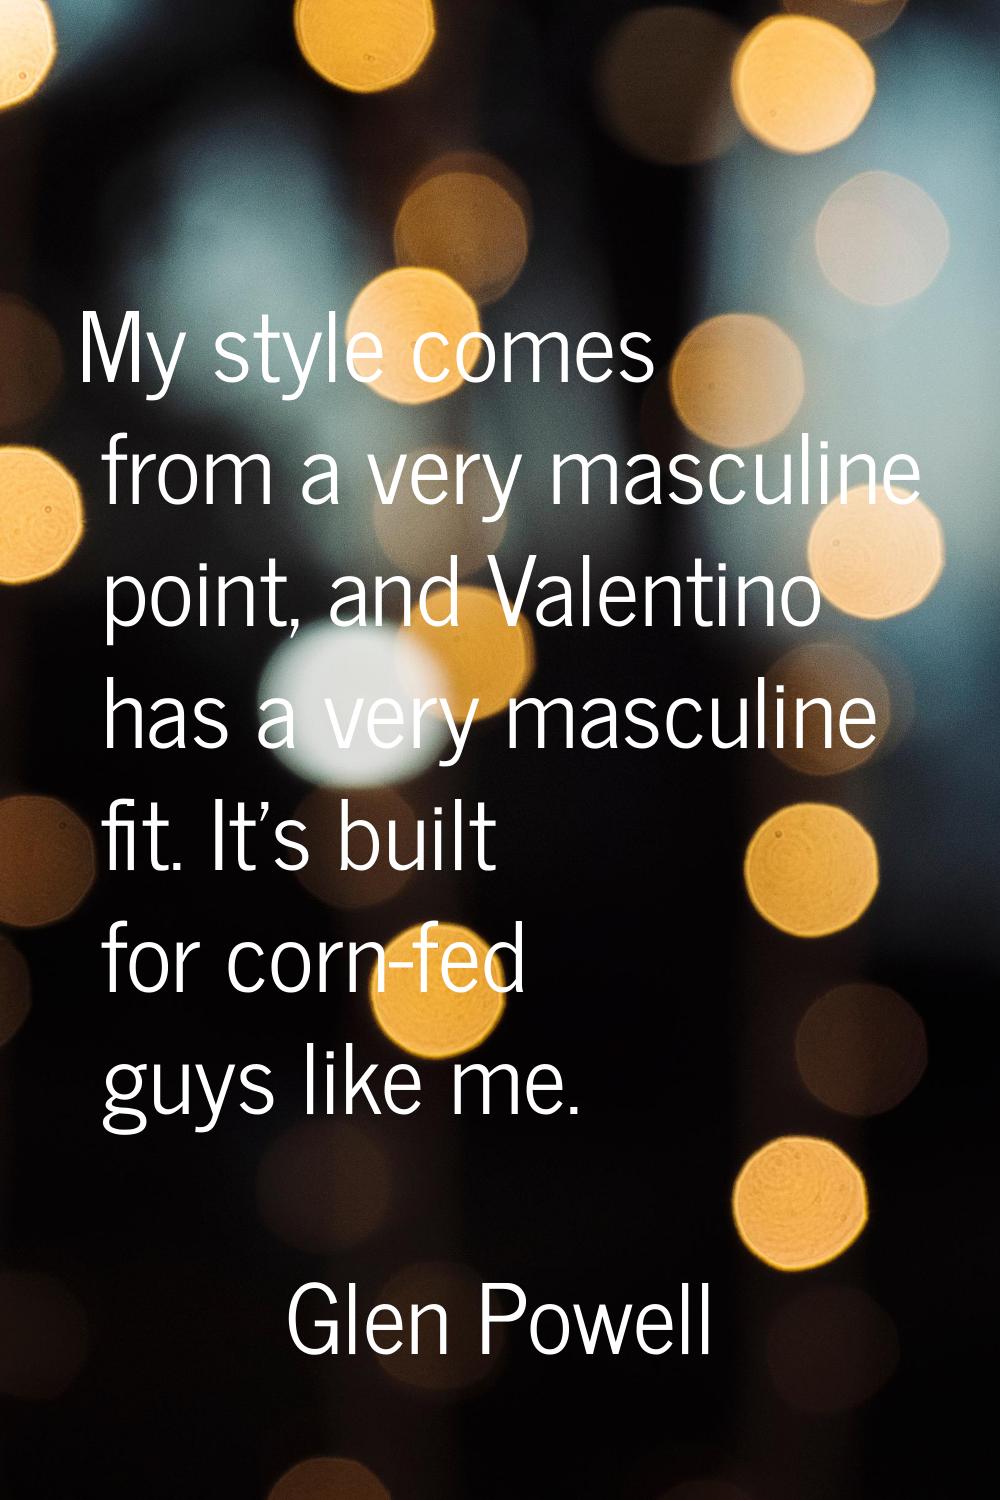 My style comes from a very masculine point, and Valentino has a very masculine fit. It's built for 